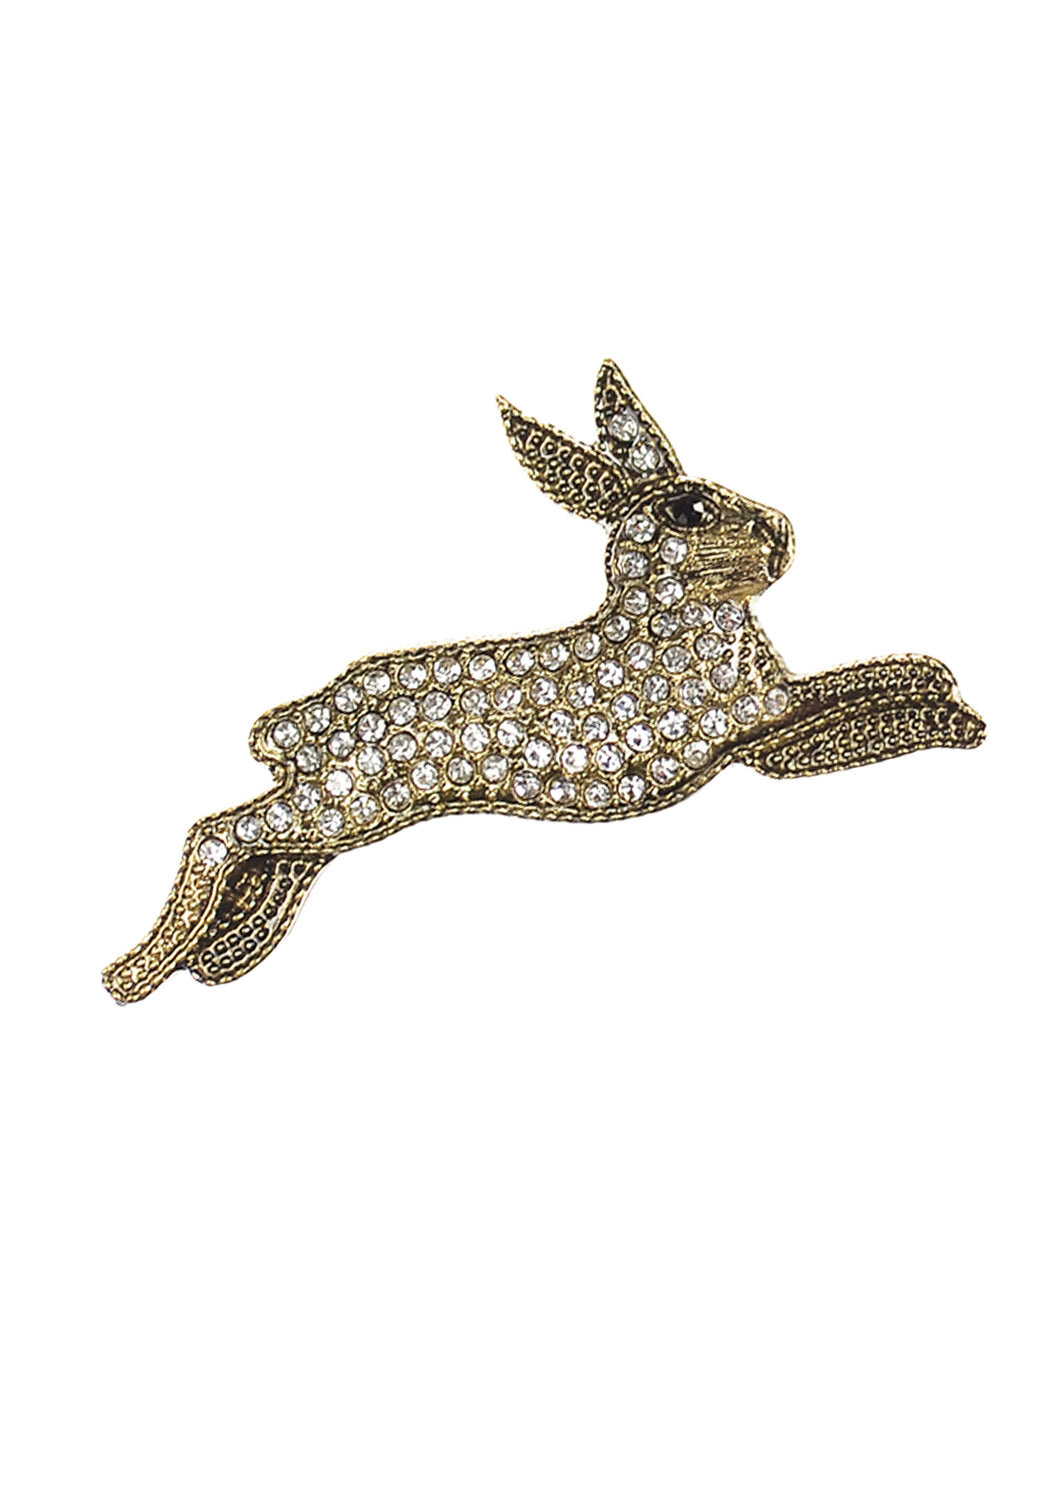 Leaping Hare - Antique Gold / Clear